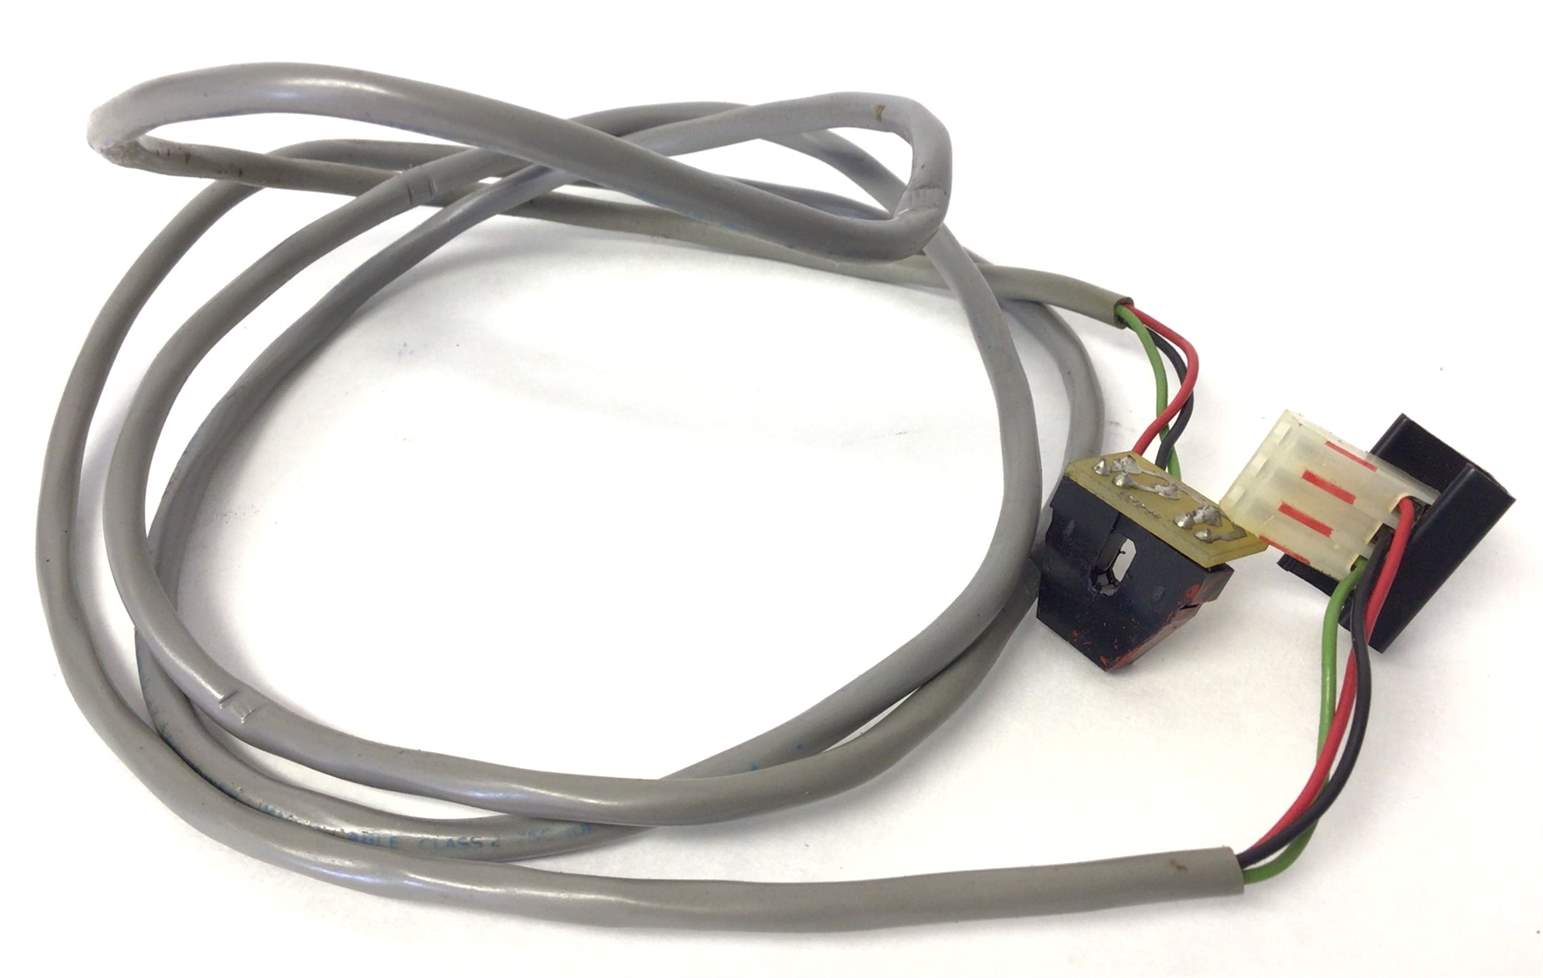 Console to Controller Wire Harness Interconnect (Used)